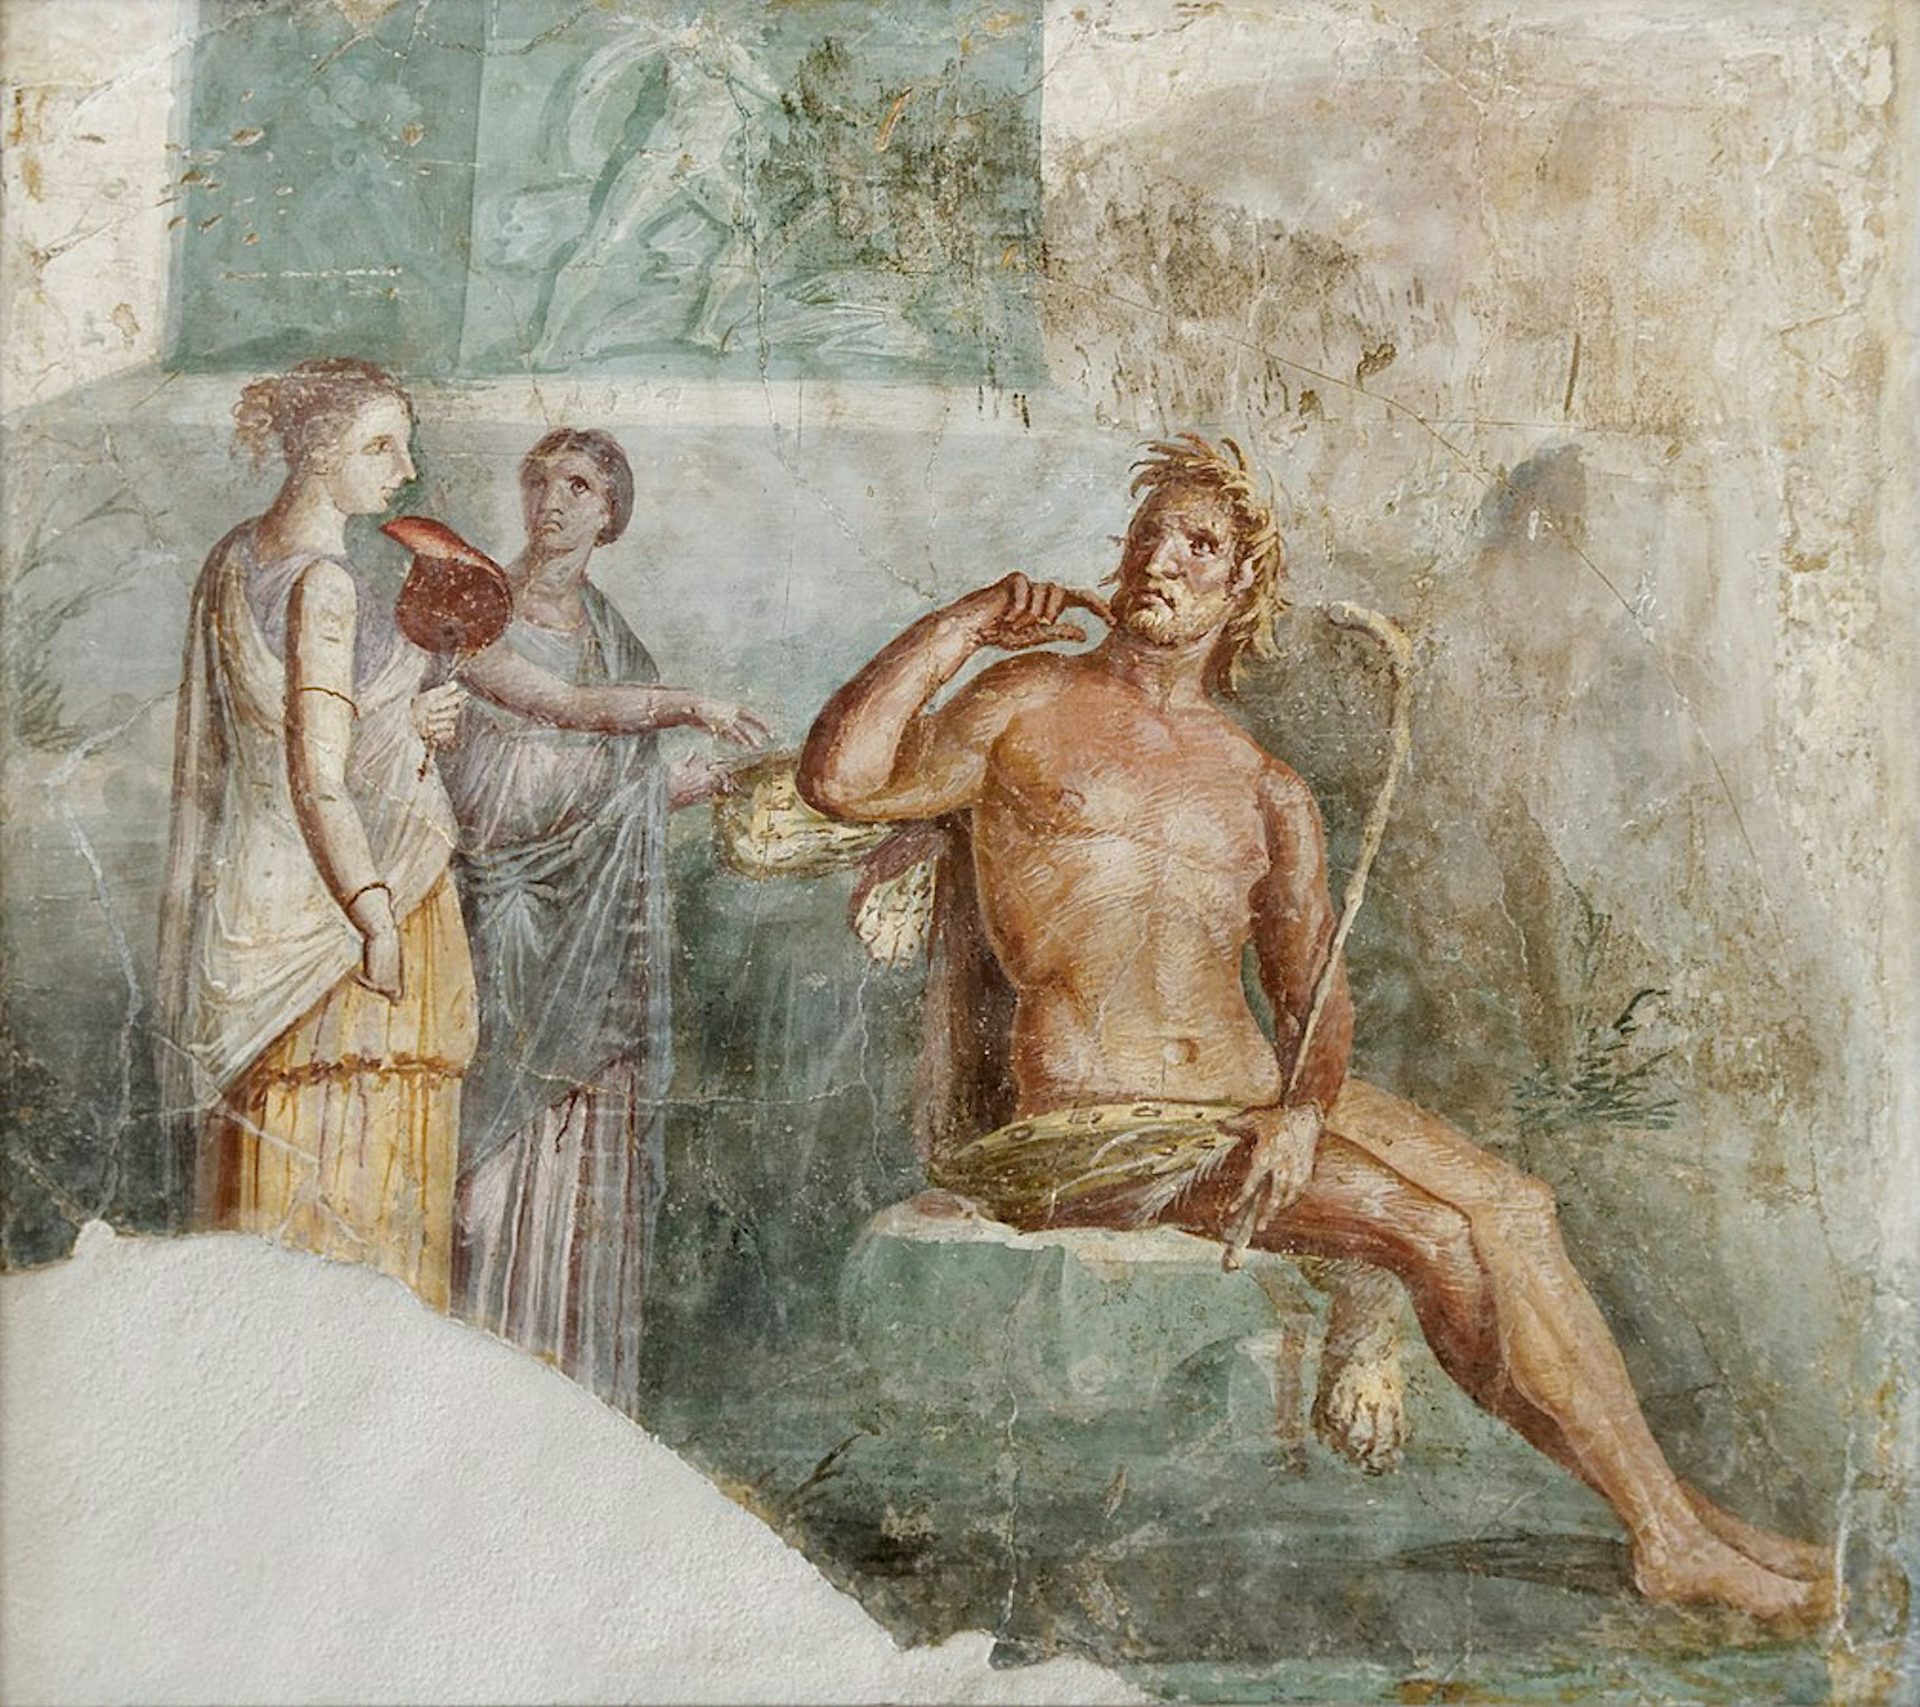 Fresco depicting the meeting of Polyphemus and Galatea